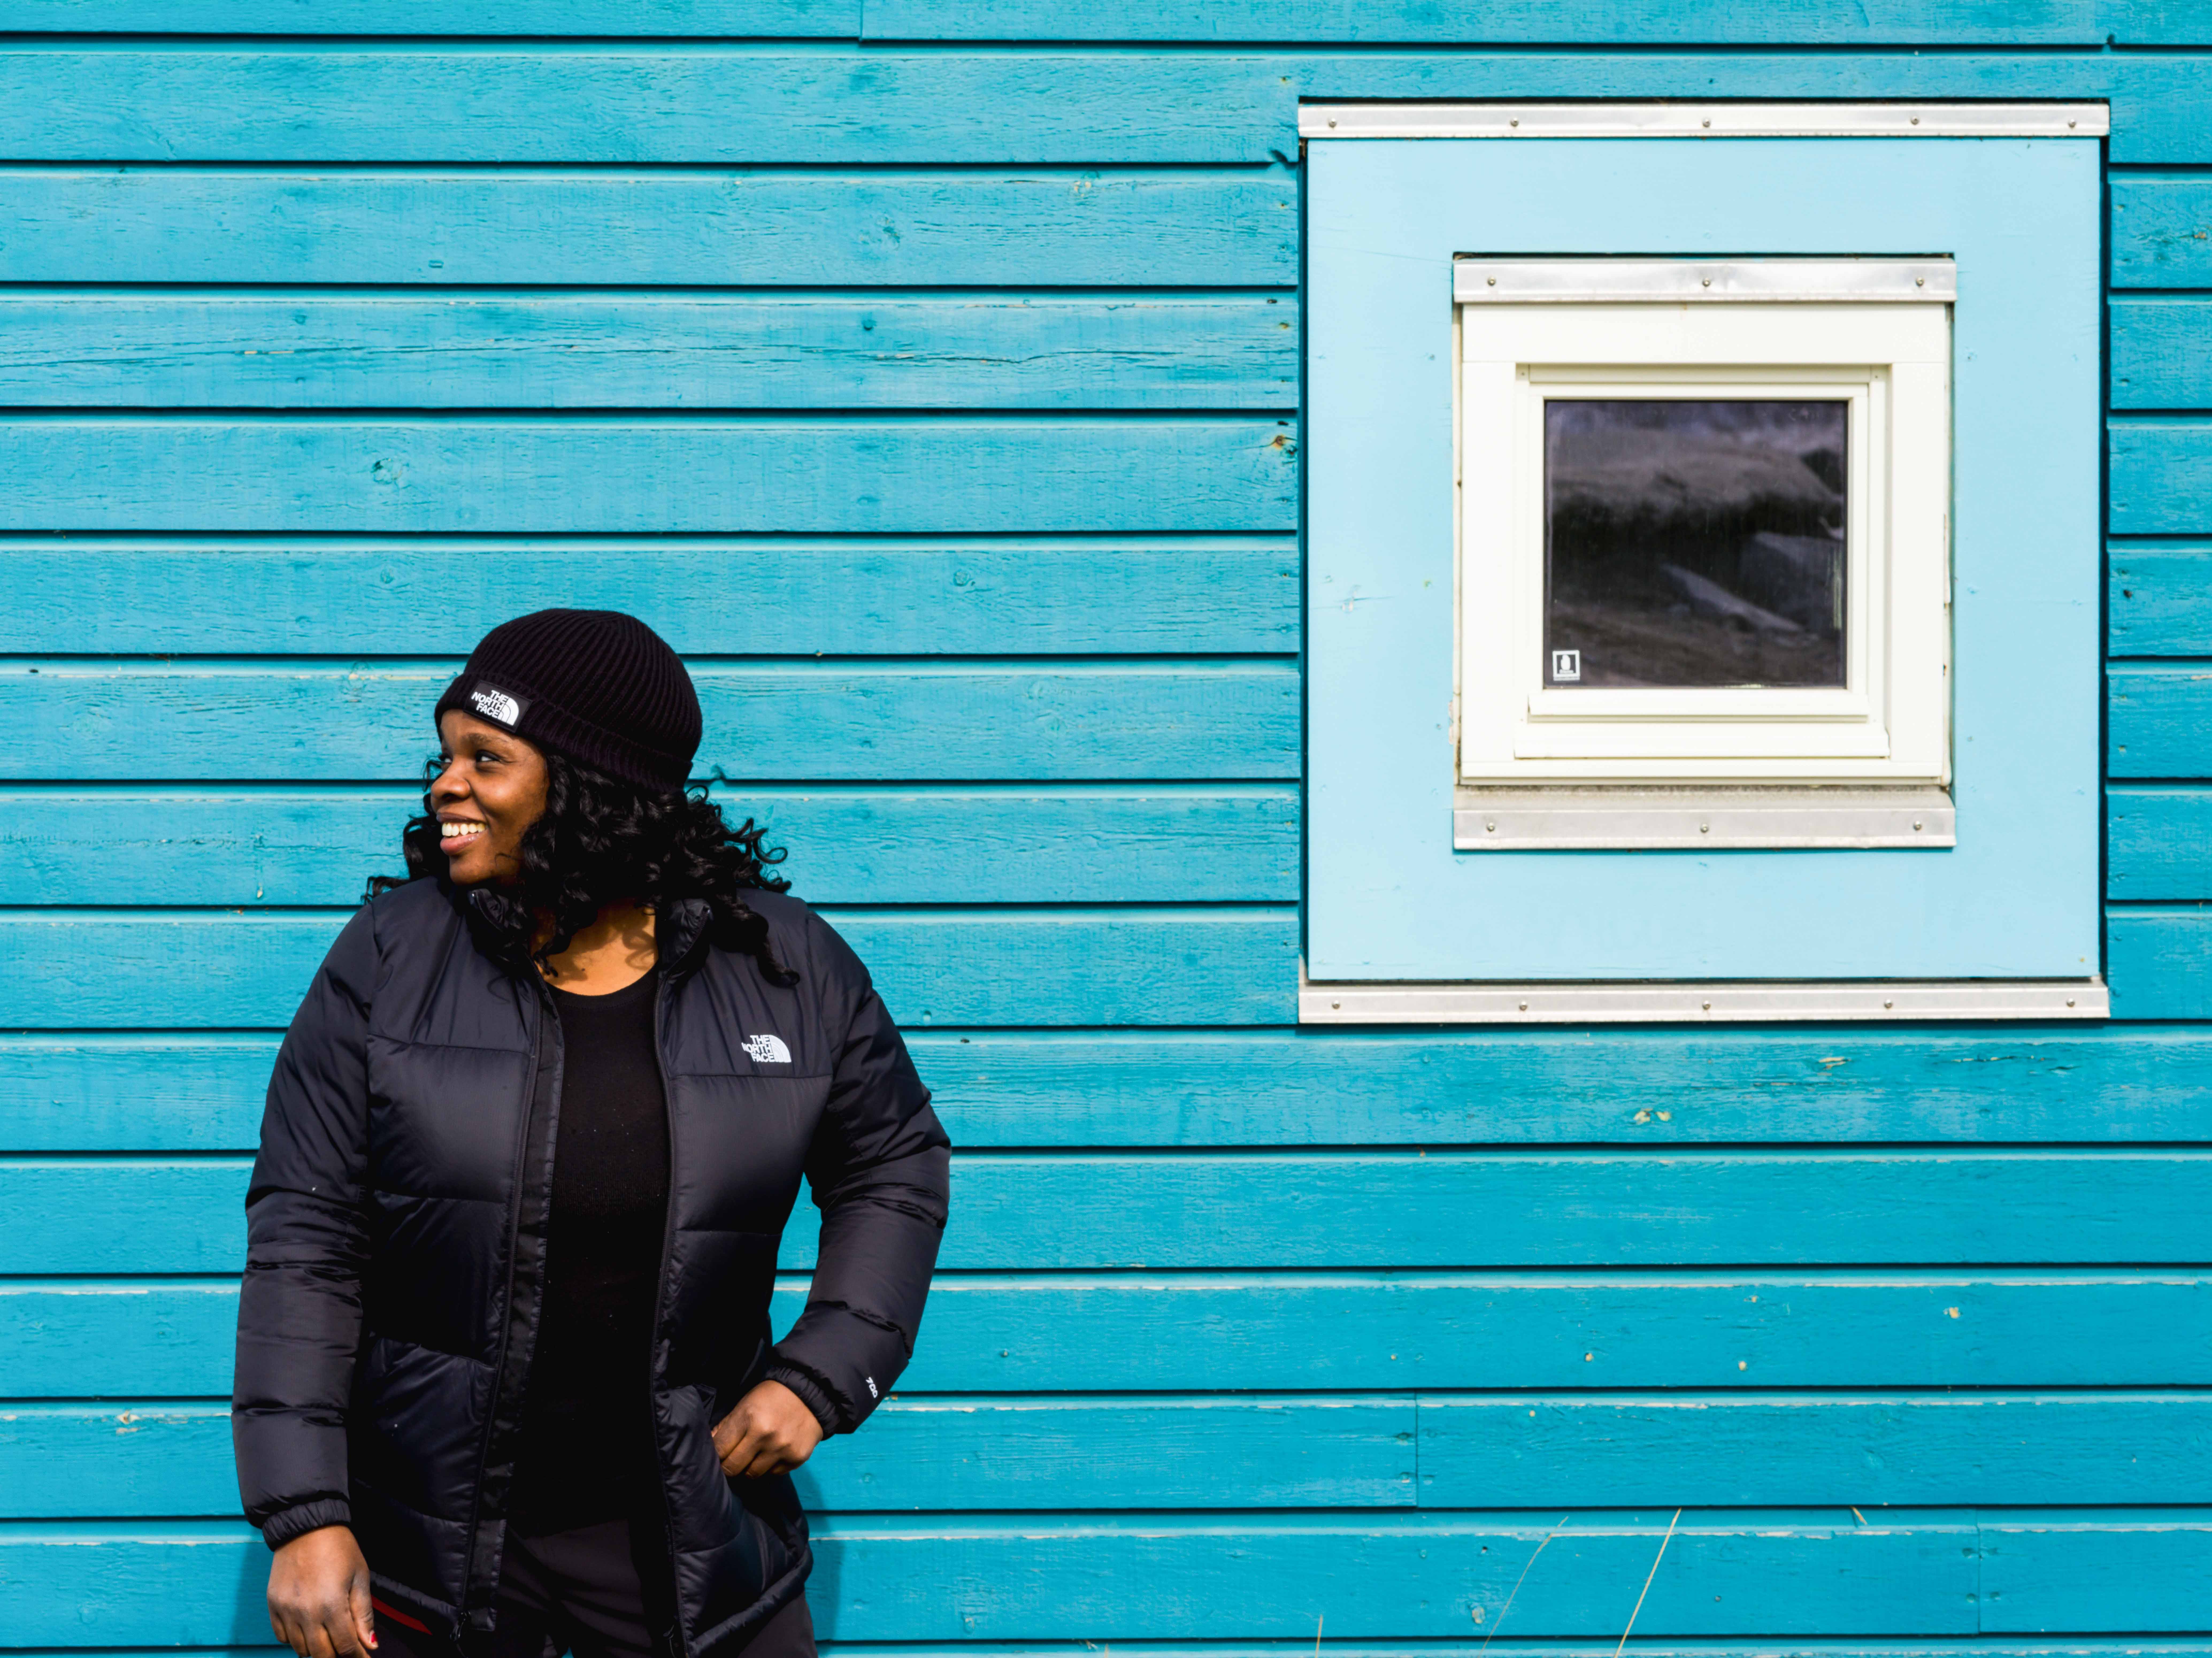 A Black woman in a black jacket and winter hat stands against the side of a building, which is painted in bright turquoise.